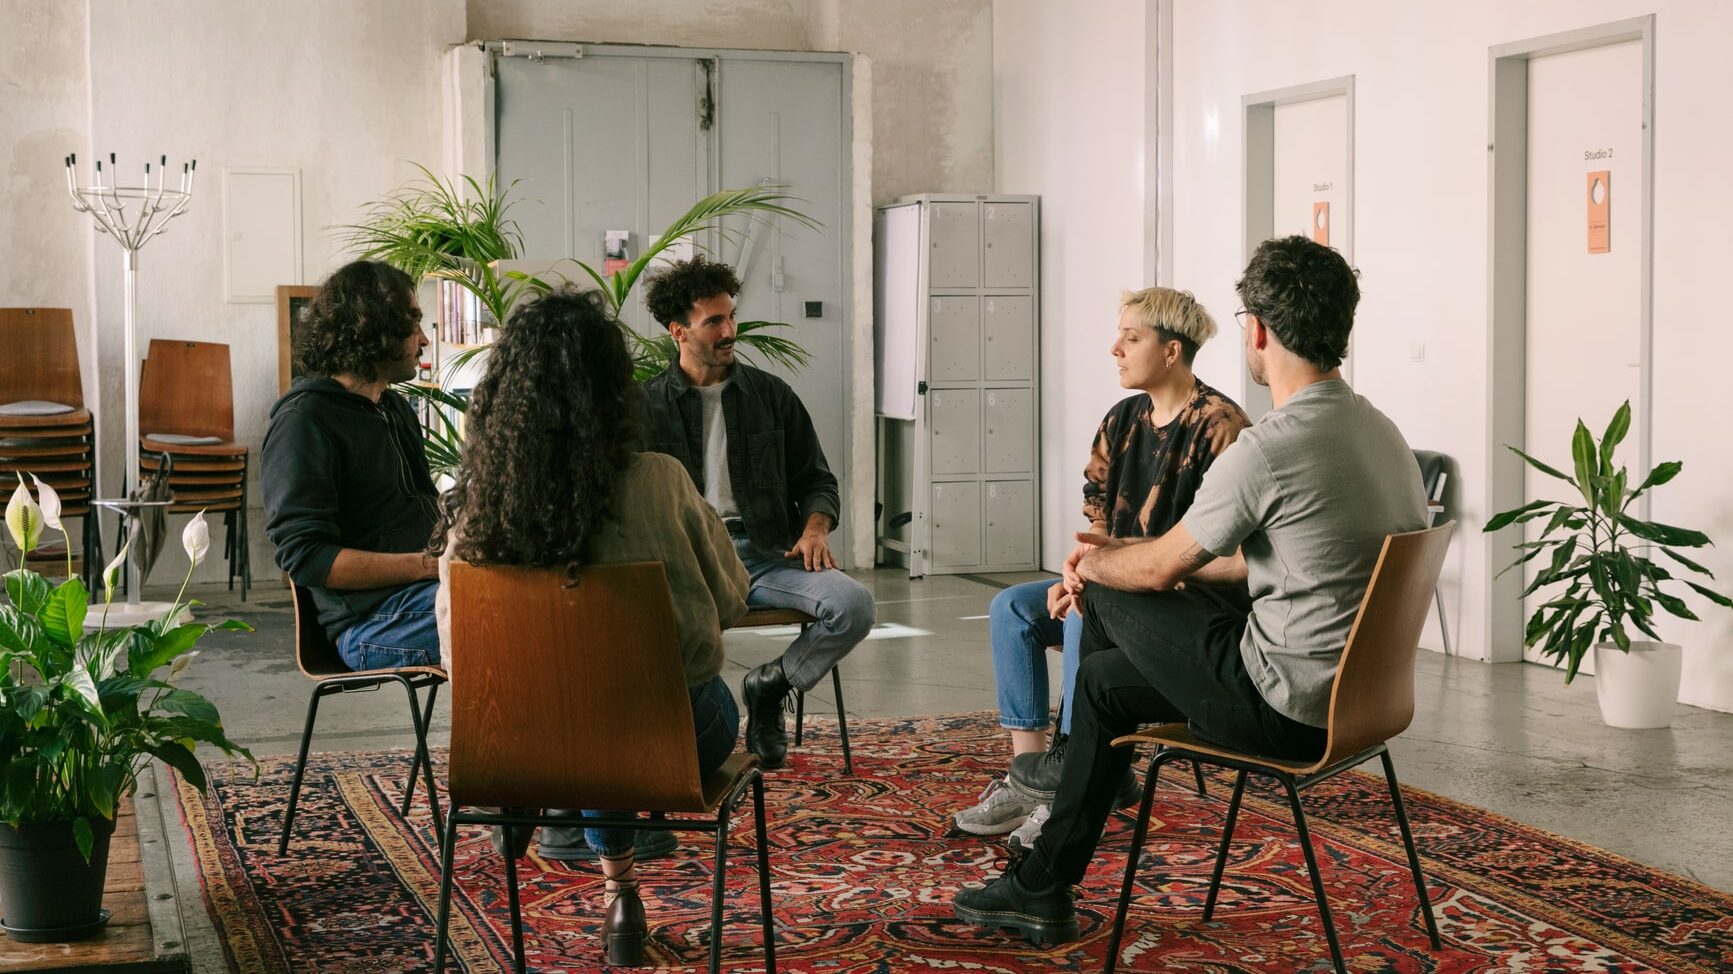 Five multiethnic people sitting on chairs and forming a circle for an introductory sharing circle